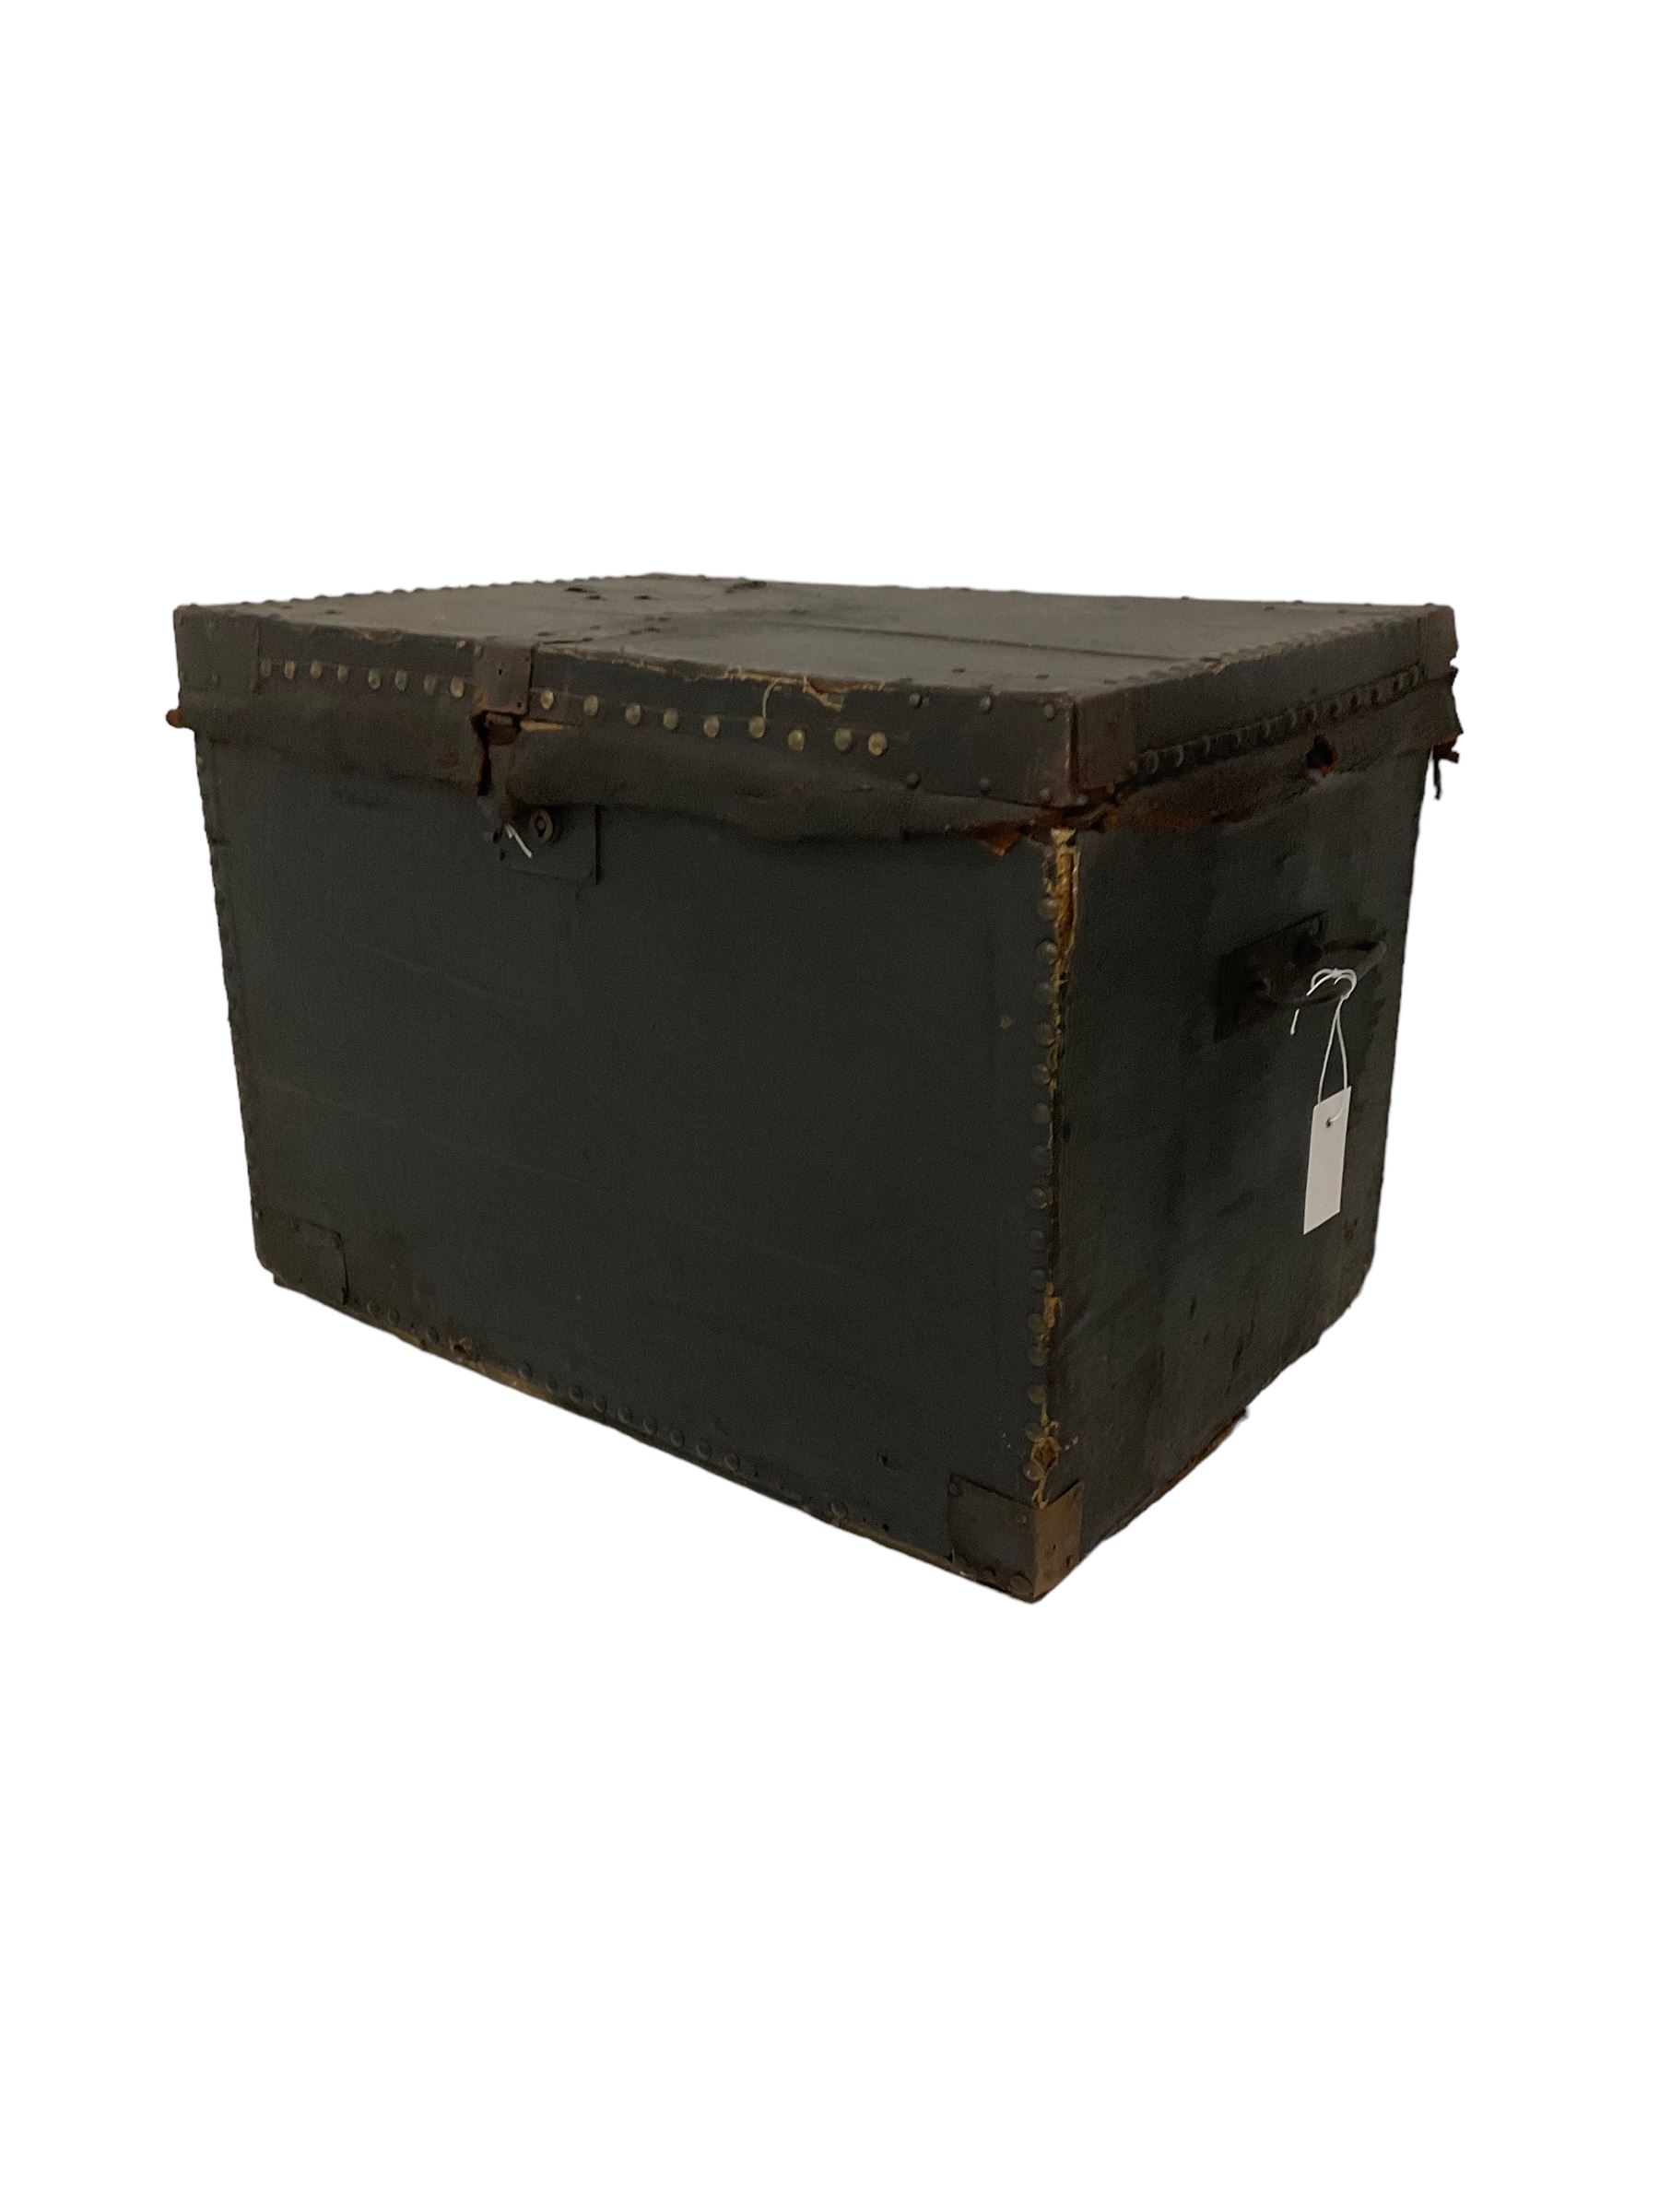 Early 20th century black painted trunk - Image 2 of 3